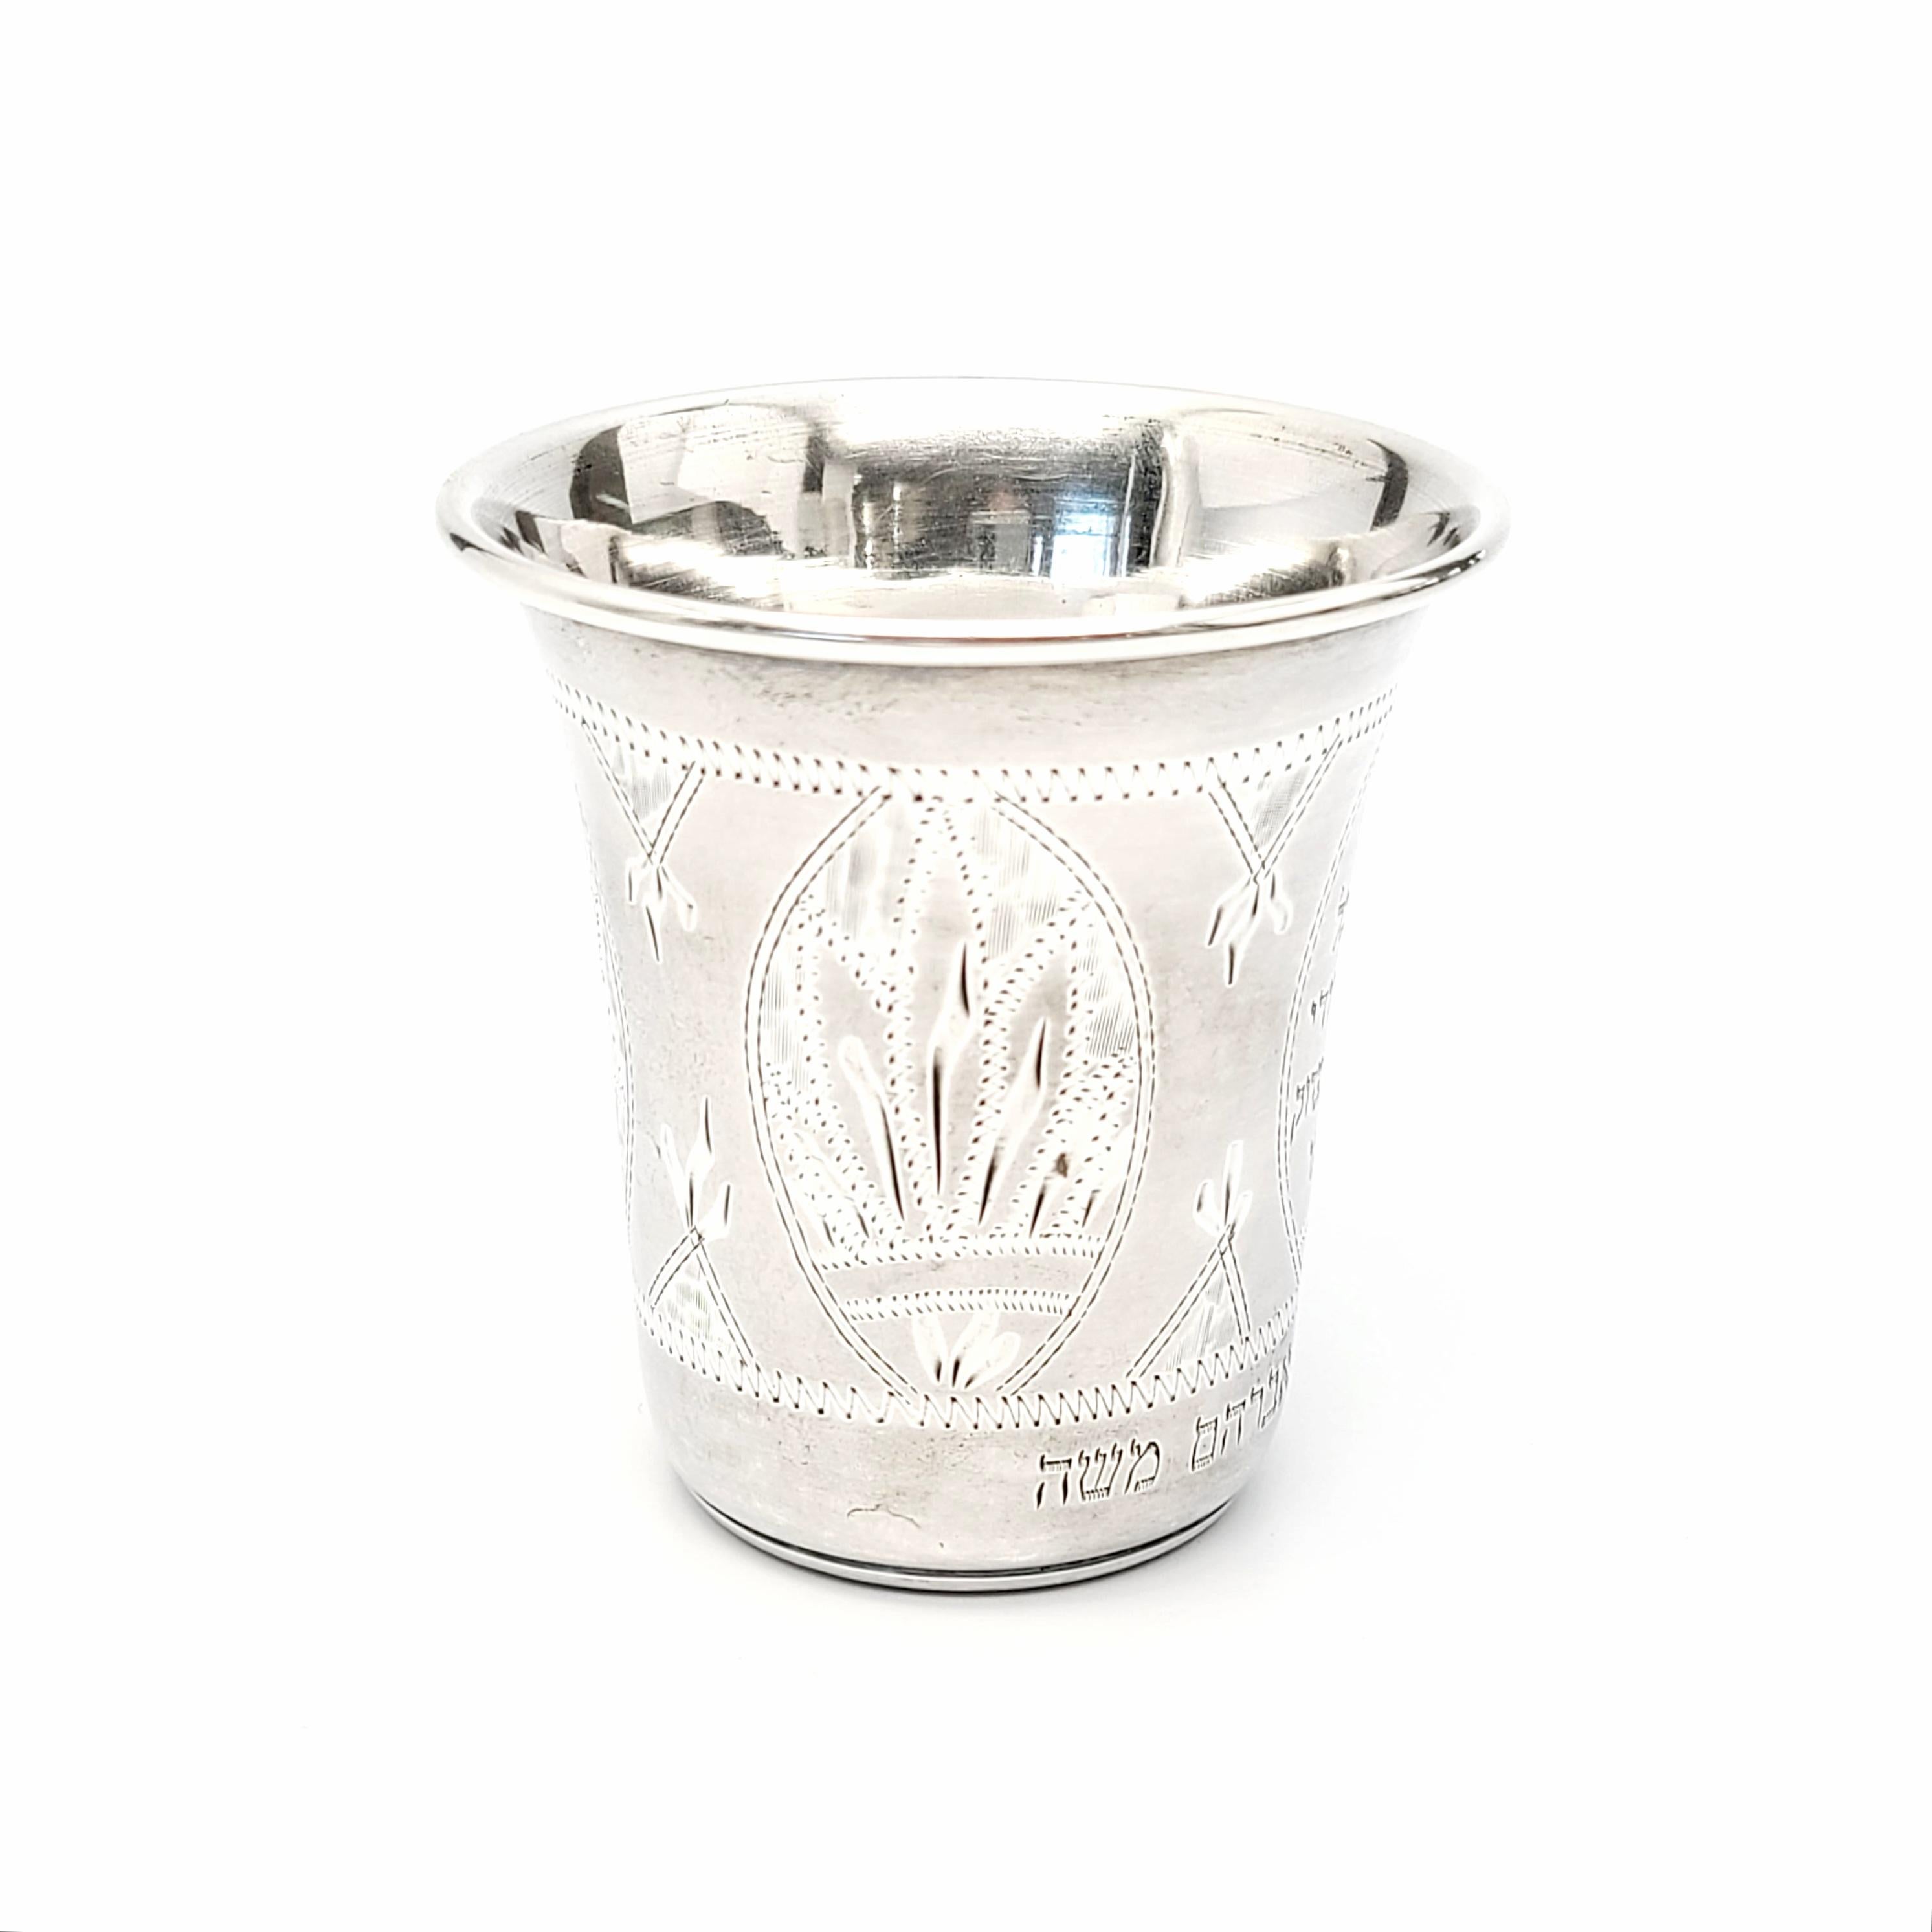 20th Century Judaica Sterling Silver Kiddush Cup with Hebrew Saying